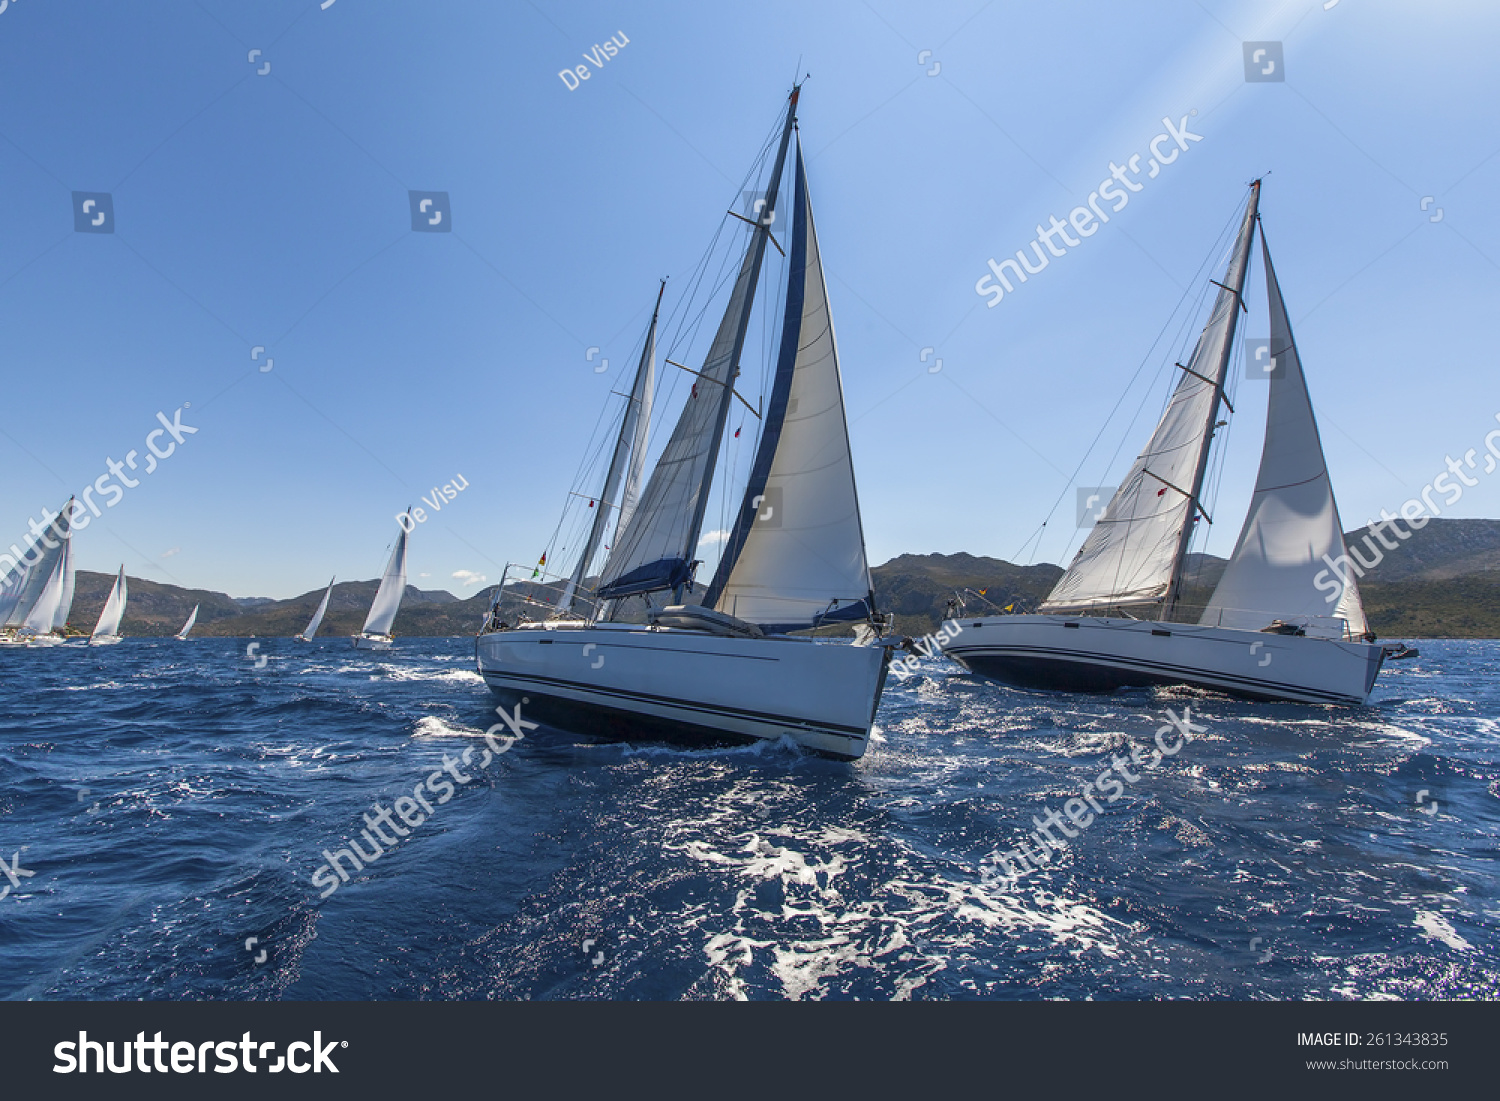 Sailing yacht race. Sailing ships yachts with white sails in the open sea. #261343835